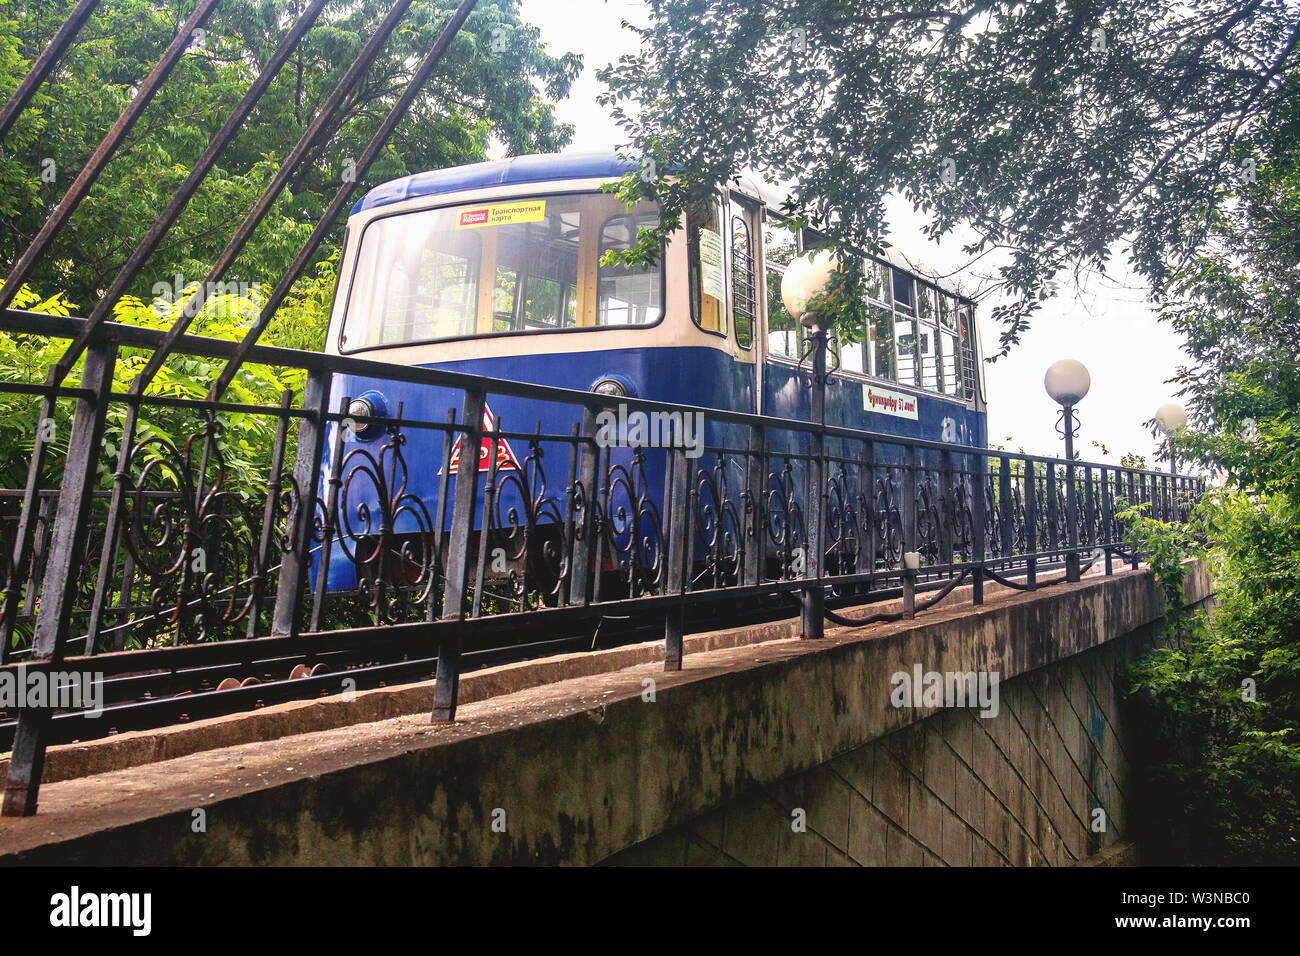 VLADIVOSTOK, RUSSIA - JULY 13, 2019: The Blue Car of the Funicular rises. The landmark of the capital of the Russian Far East Vladivostok. Stock Photo